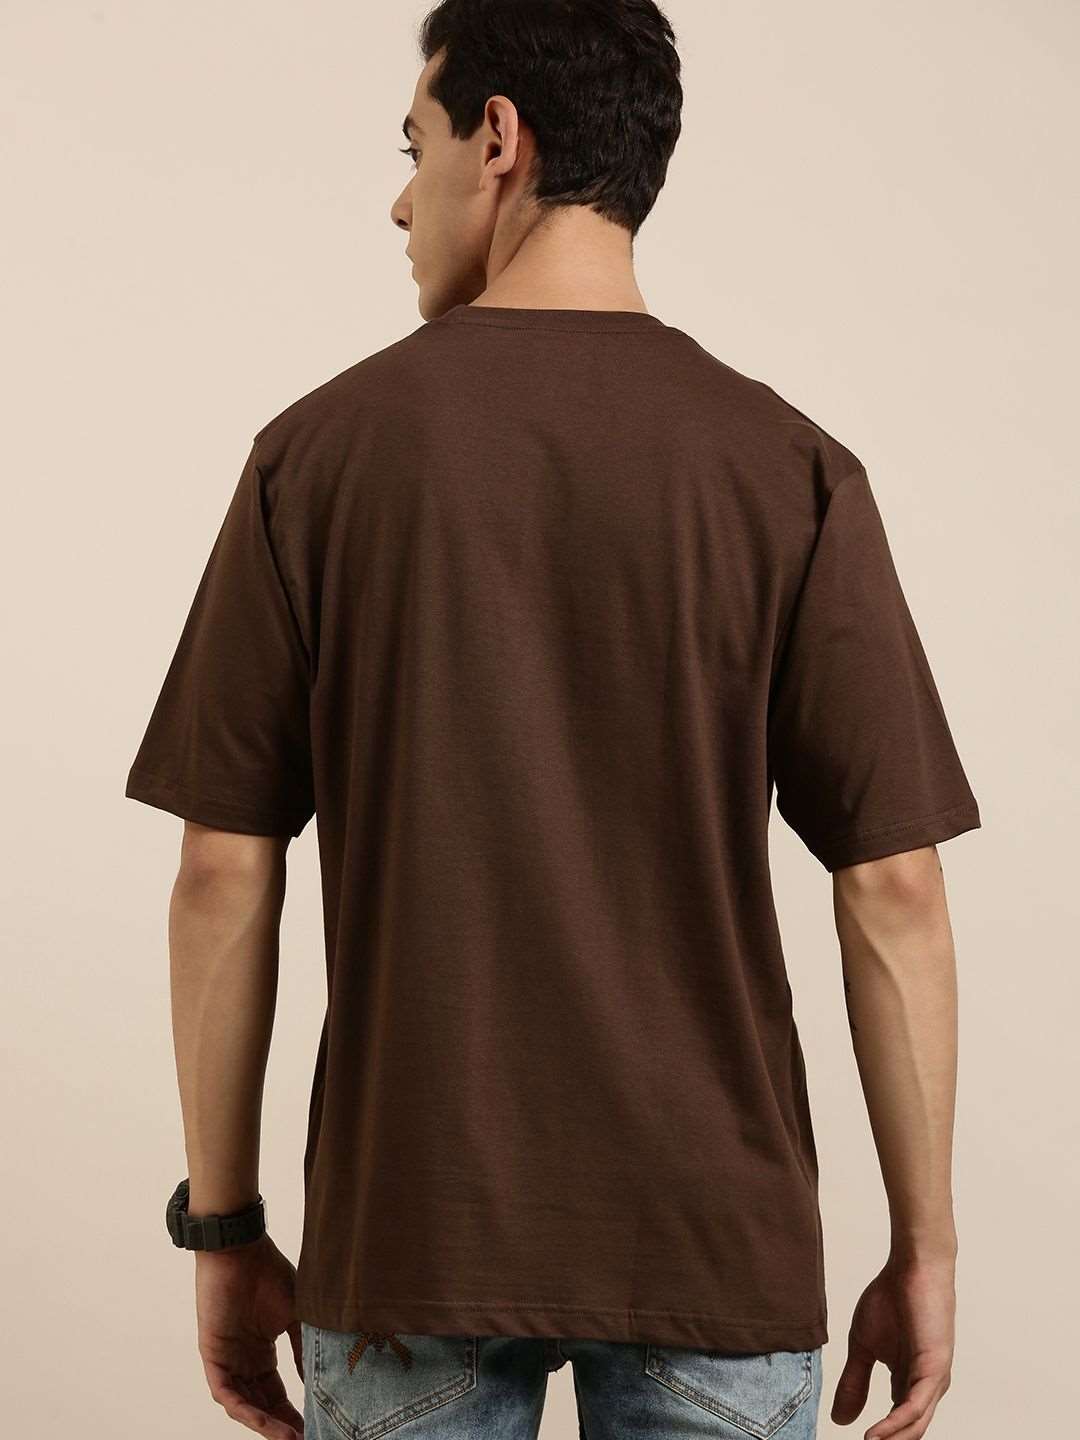 Dillinger Brown Typographic Oversized T-Shirt